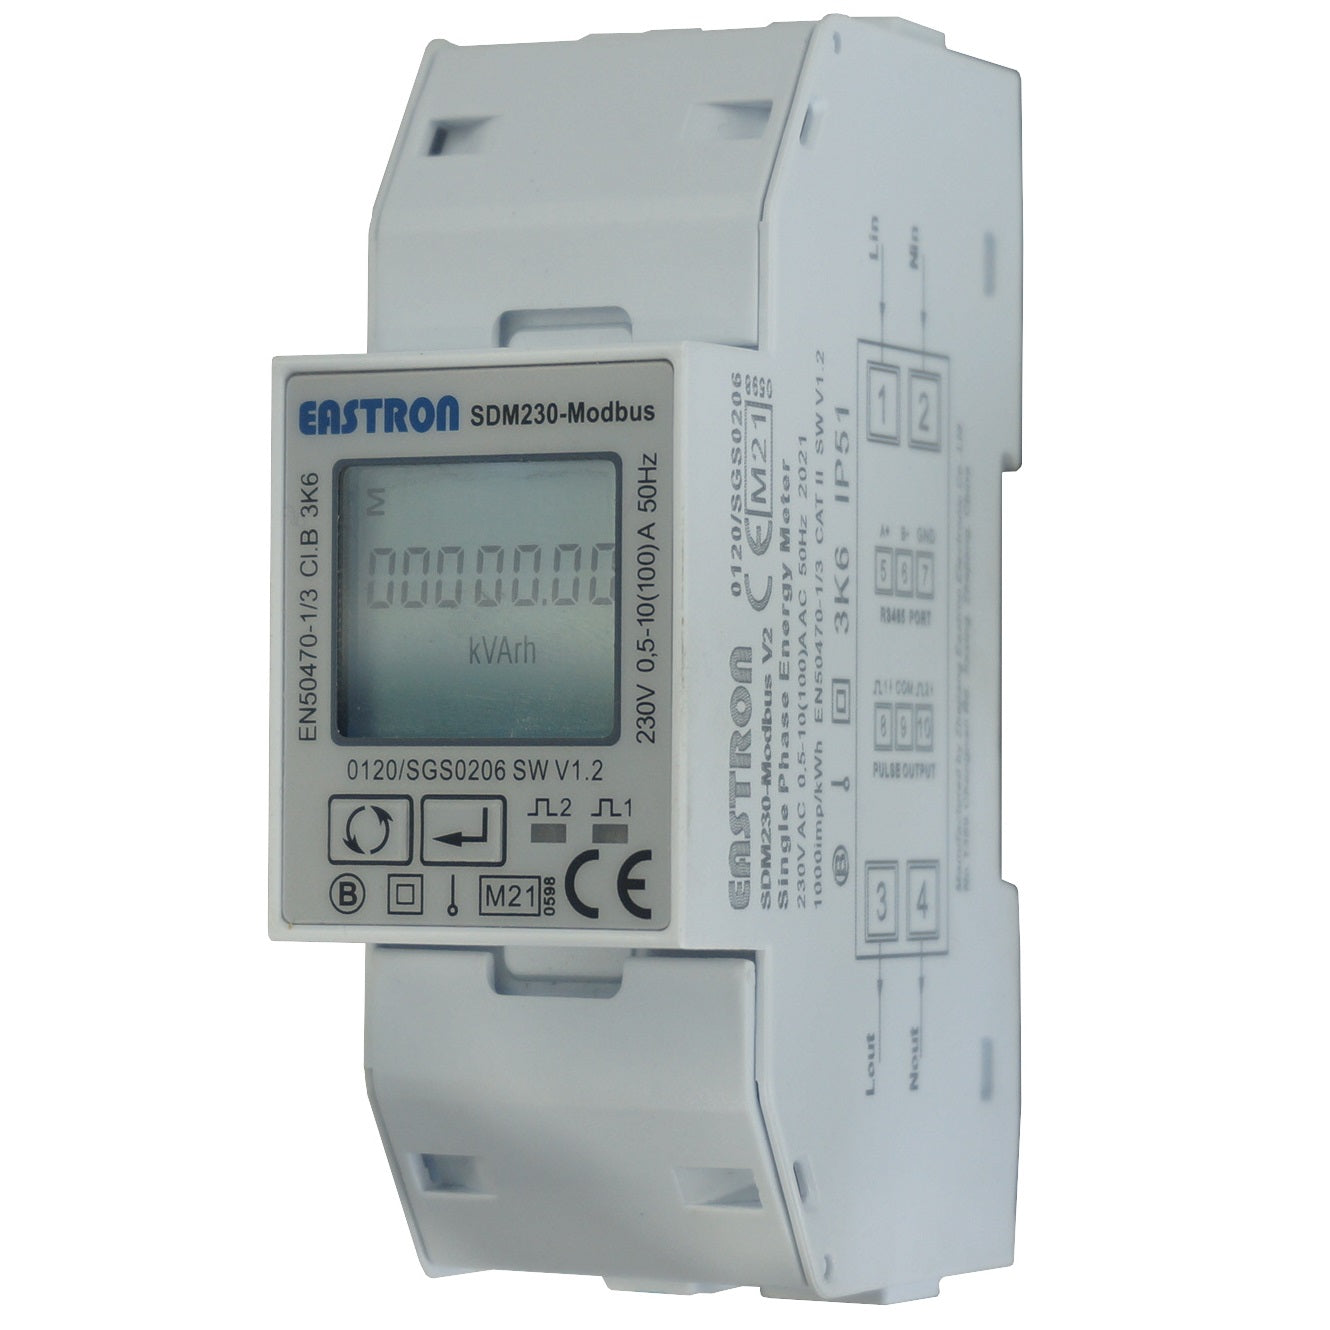 SDM230-Modbus-MID-V2, DIN Rail Mount kWh Meter, Single Phase, 240VAC aux, Class 1, 100Amp Direct Connect, w/ 2 x pulse outputs and RS485 Modbus RTU Comms, MID Approved